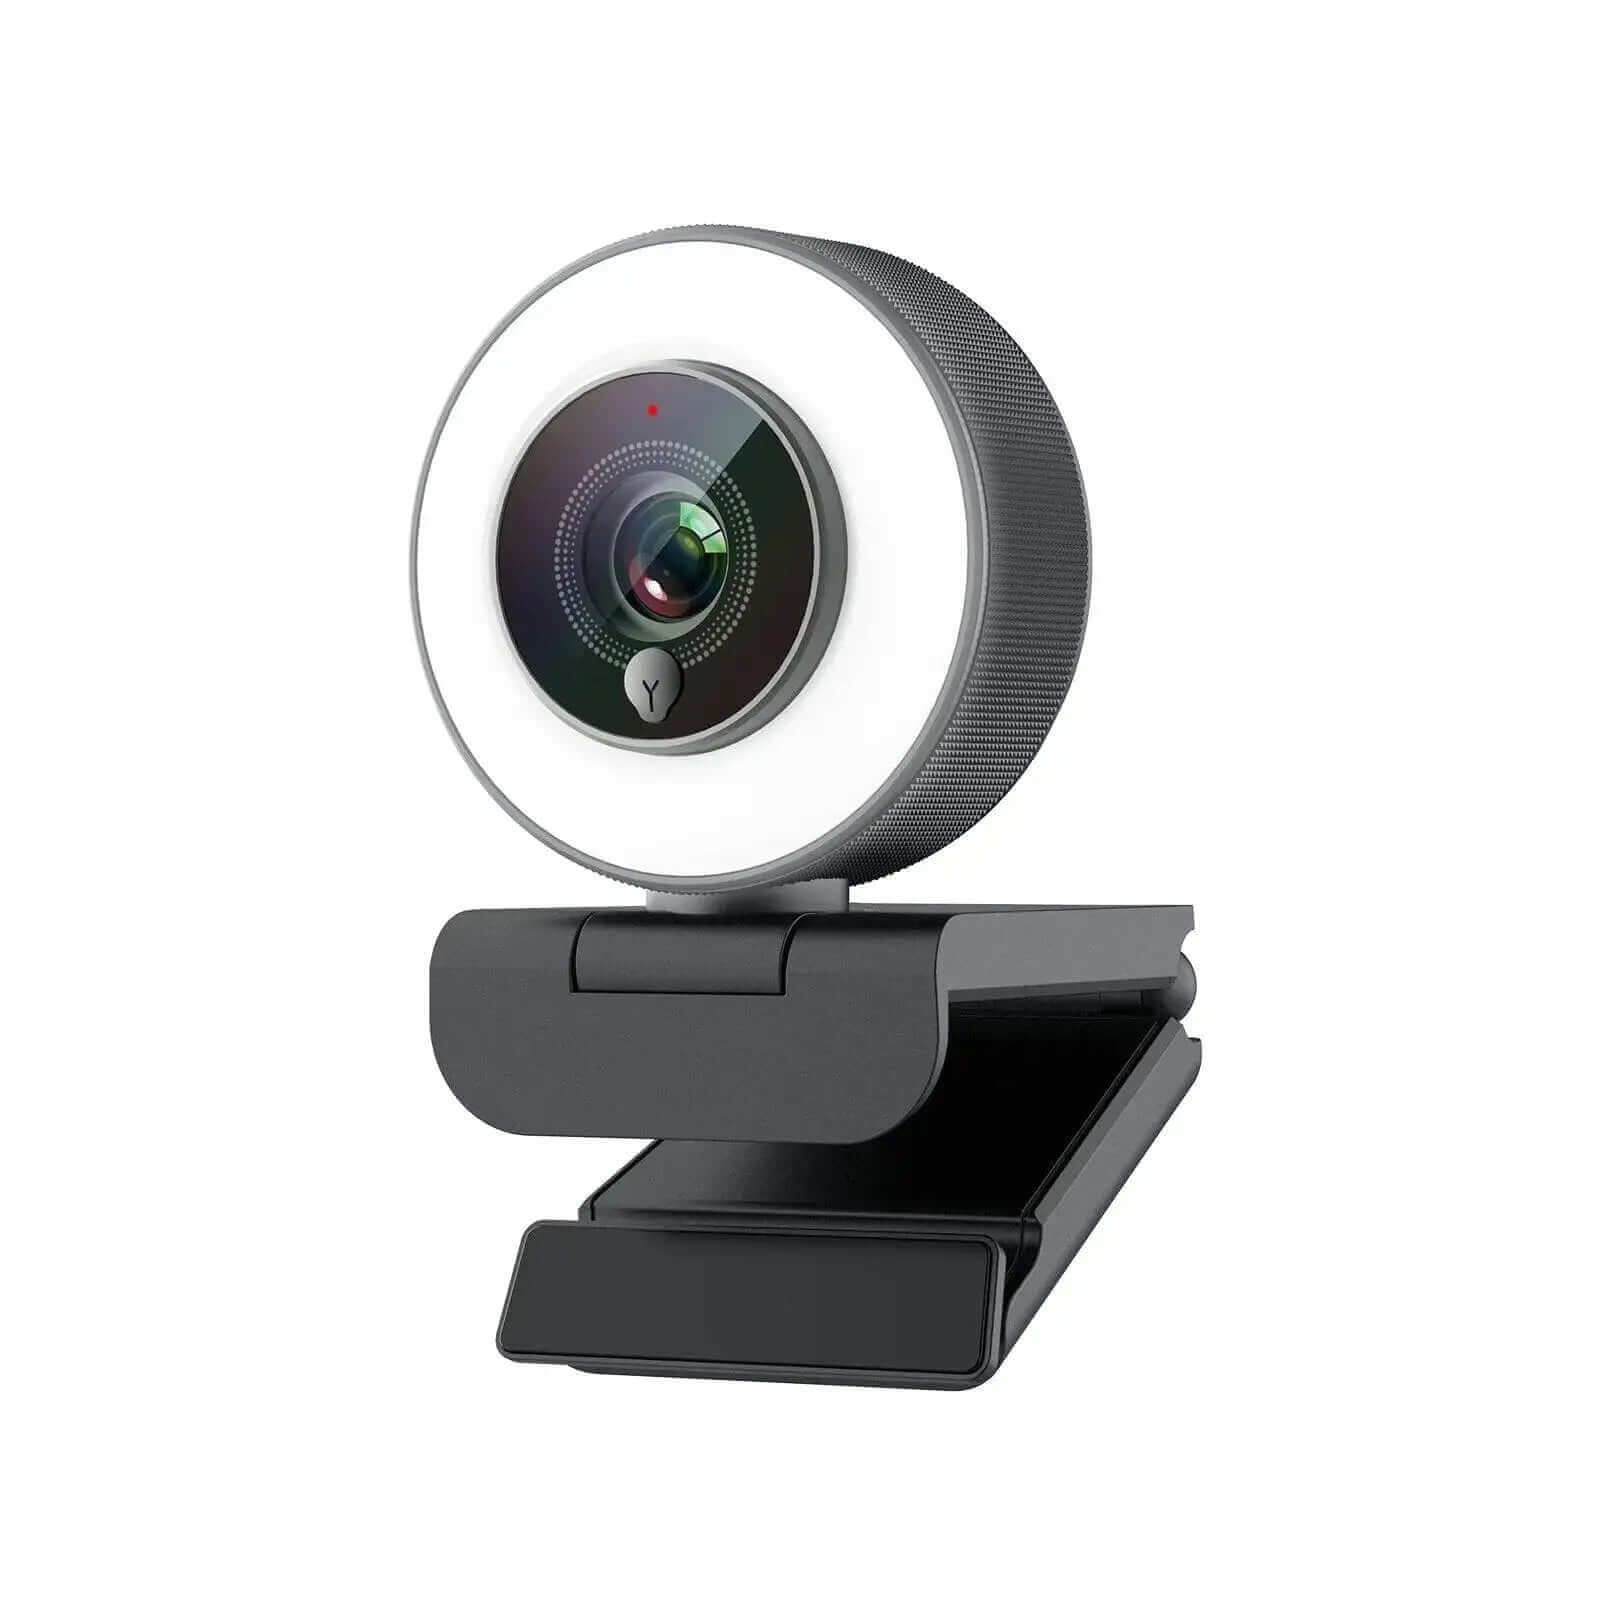 Angetube 2K Streaming Webcam with Ring Light with Remote